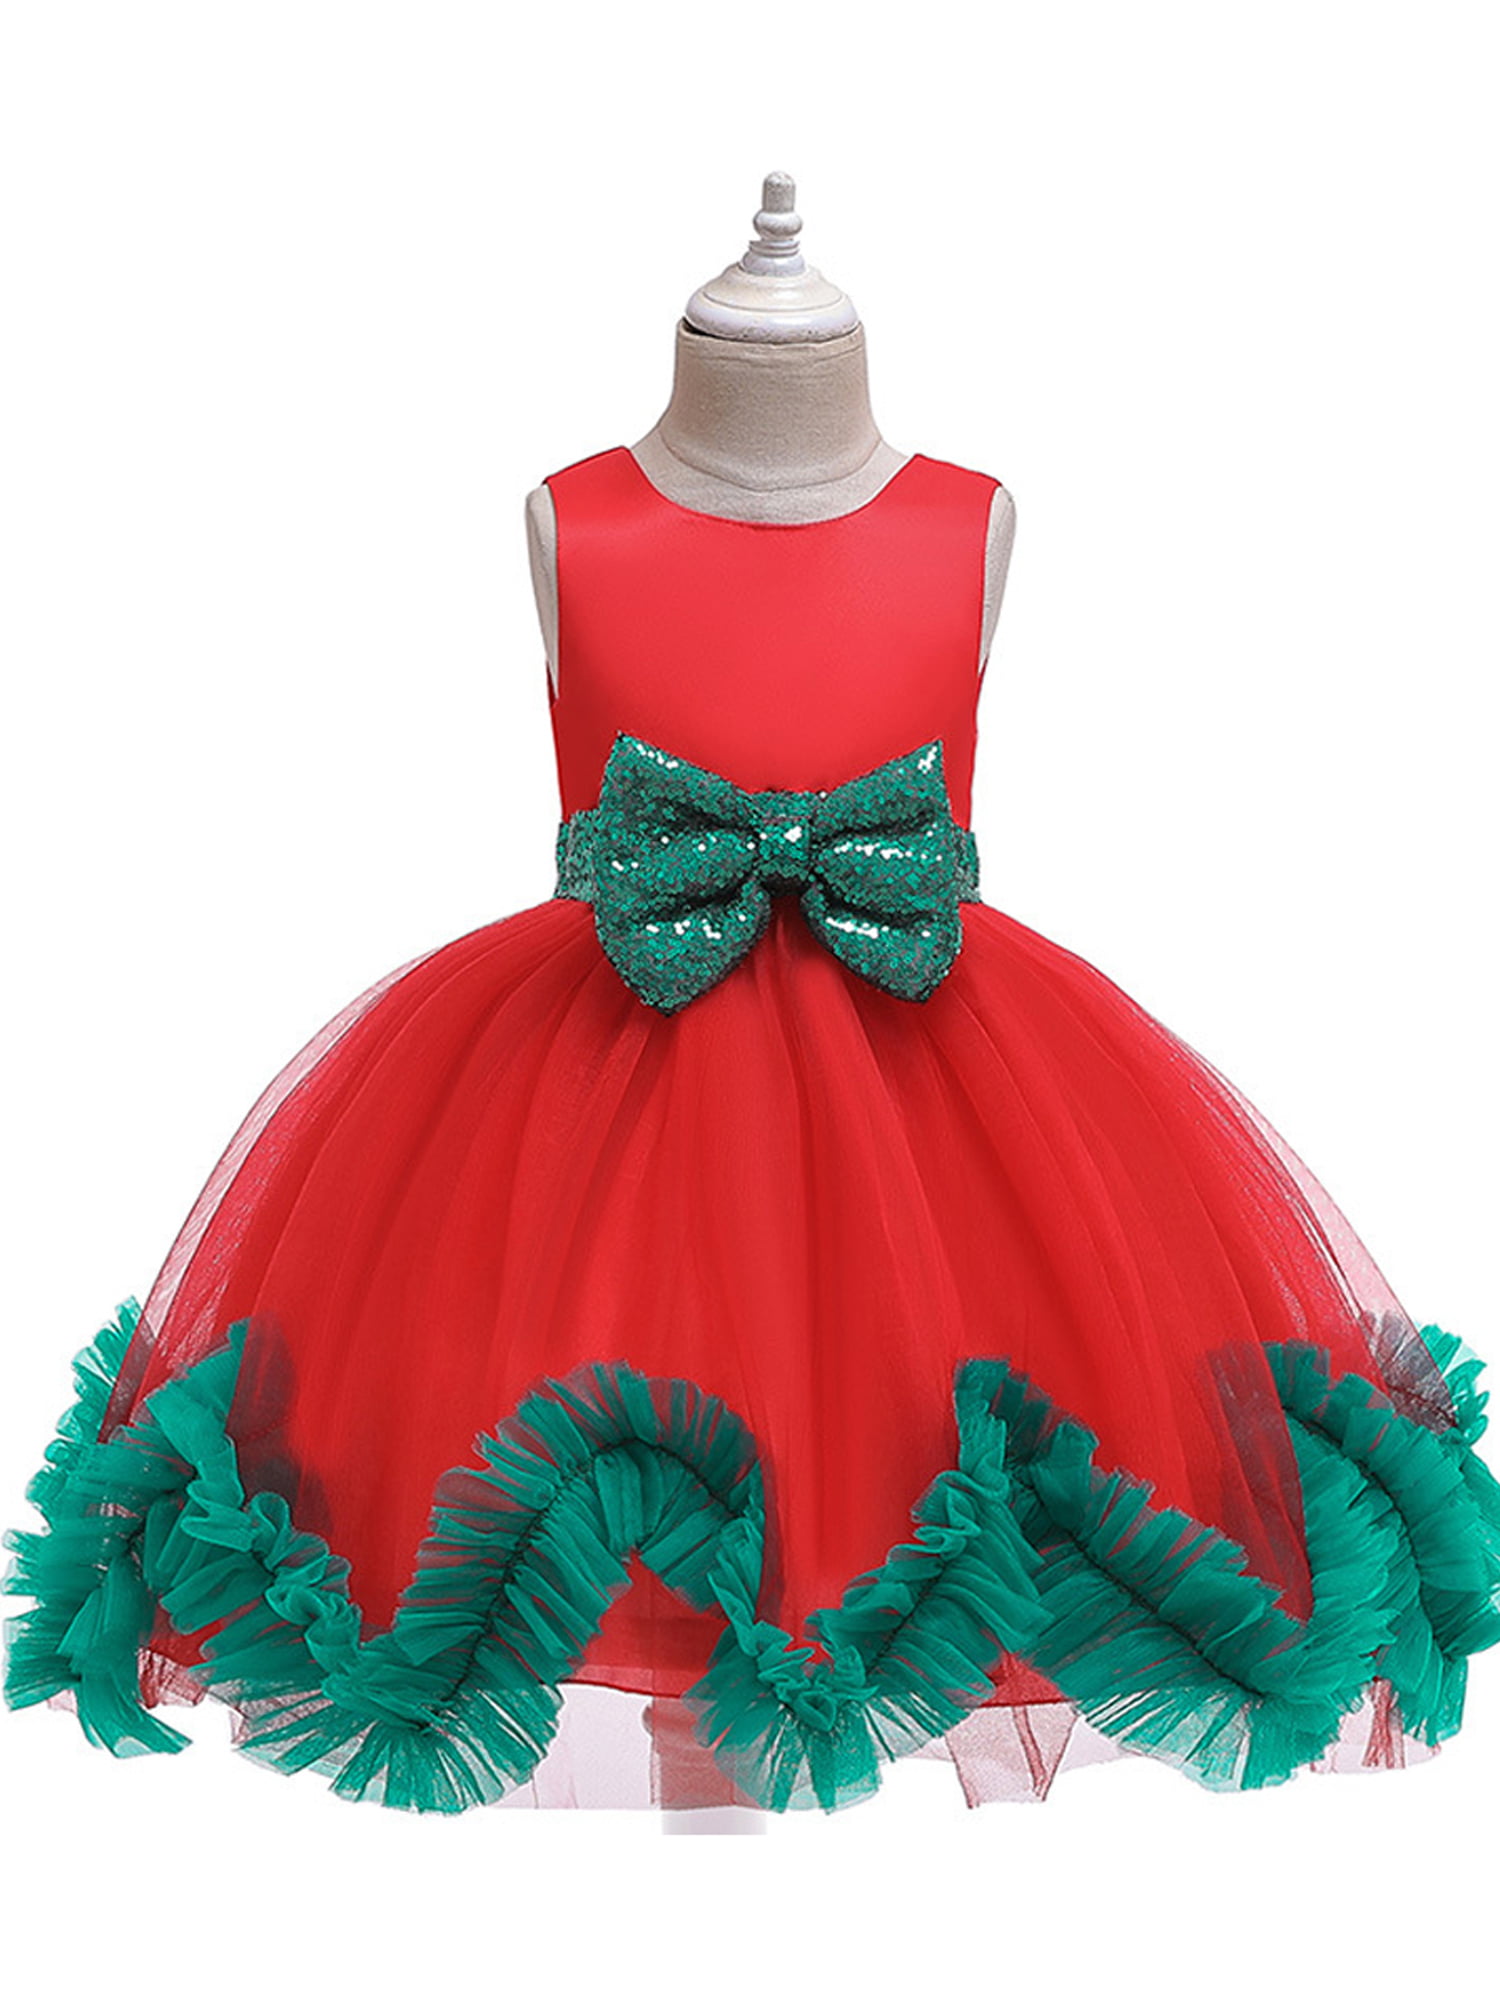 Red Christmas Flower Girl Wedding Pageant Prom Bridesmaid Party Dress Xmas 0-24m 